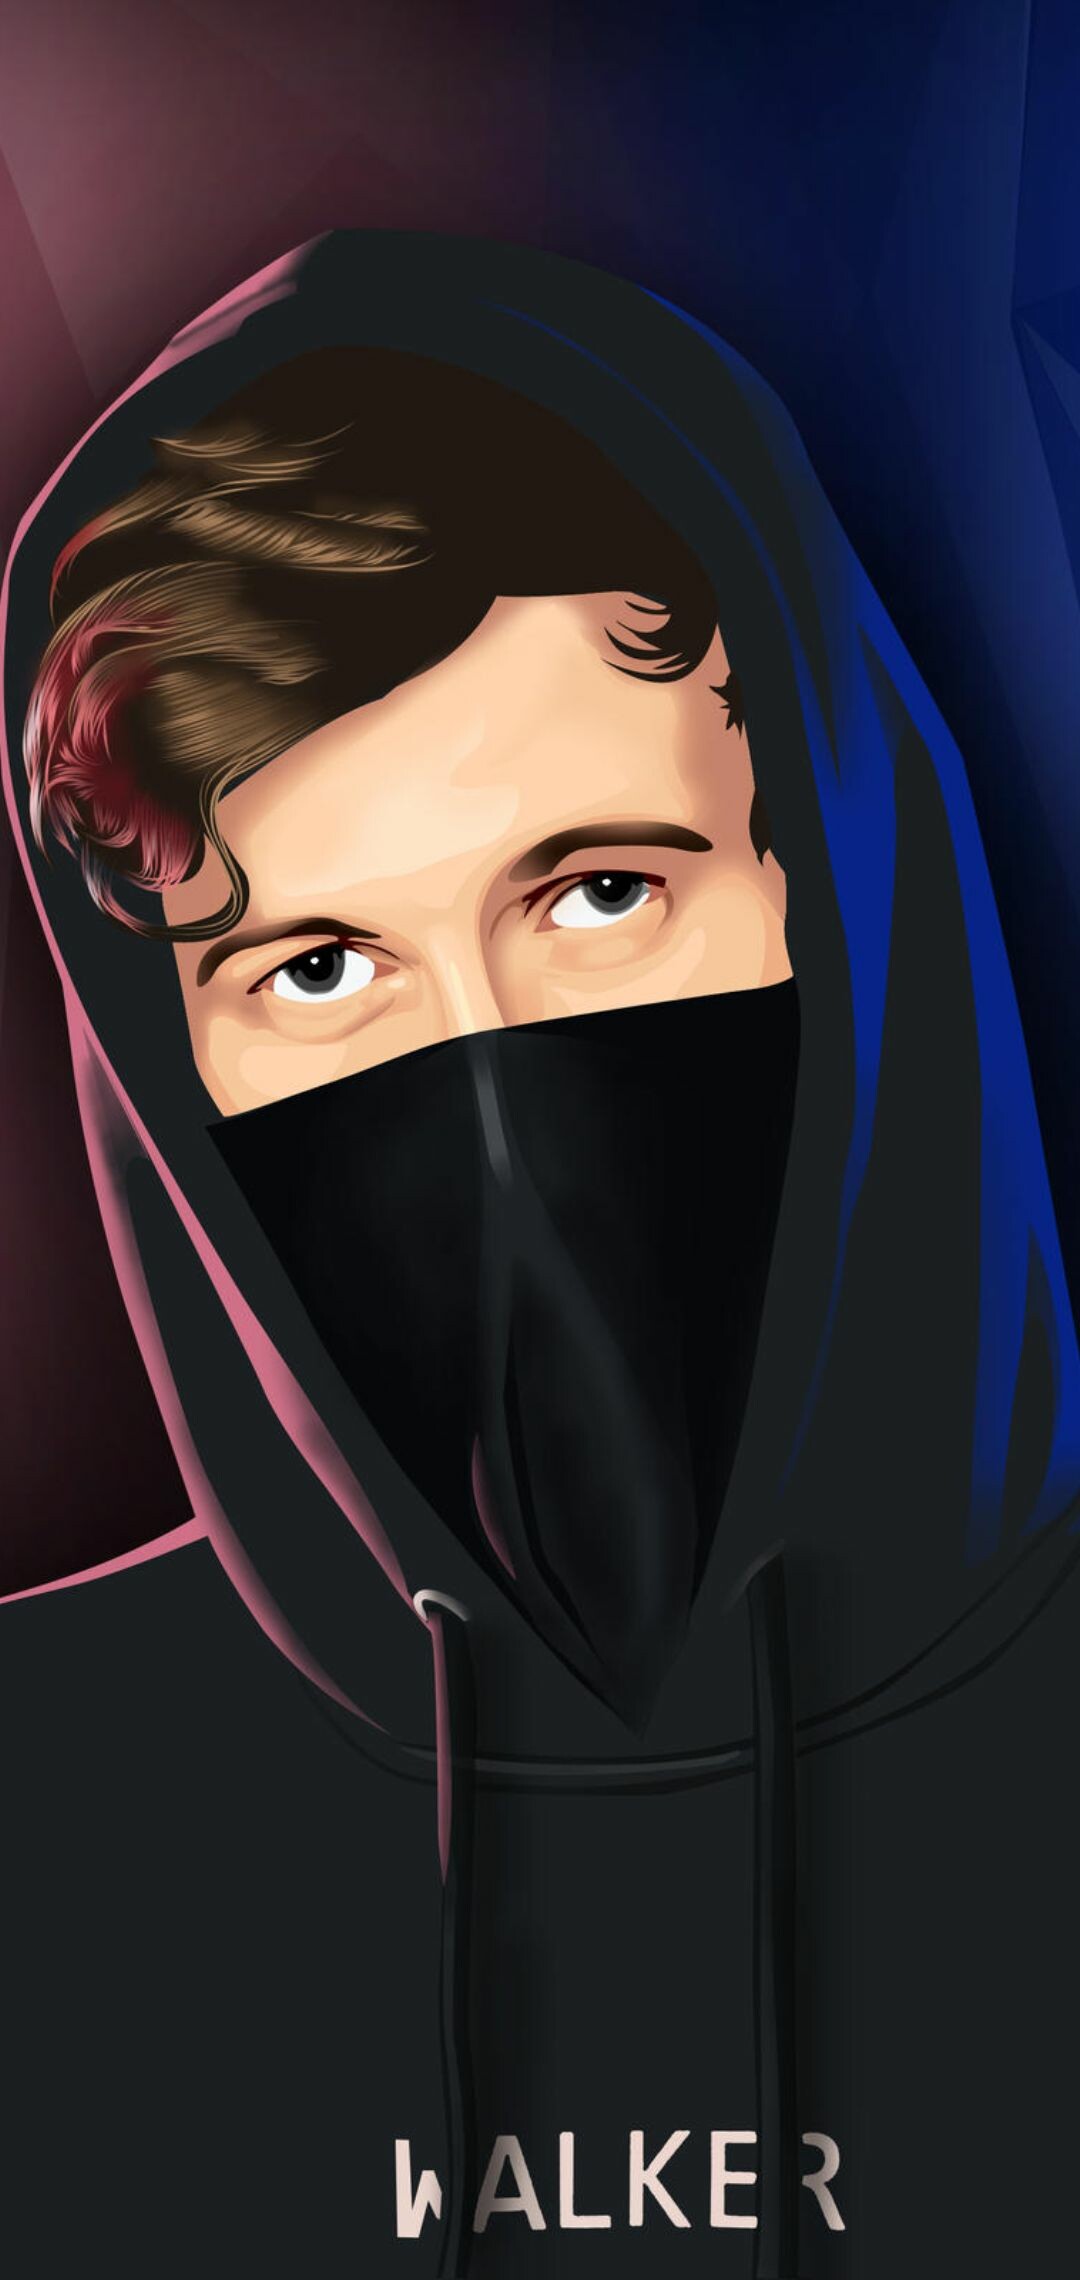 Alan Walker: “Faded”, Entered the Billboard Hot 100 chart, “Sing me to sleep”. 1080x2280 HD Background.